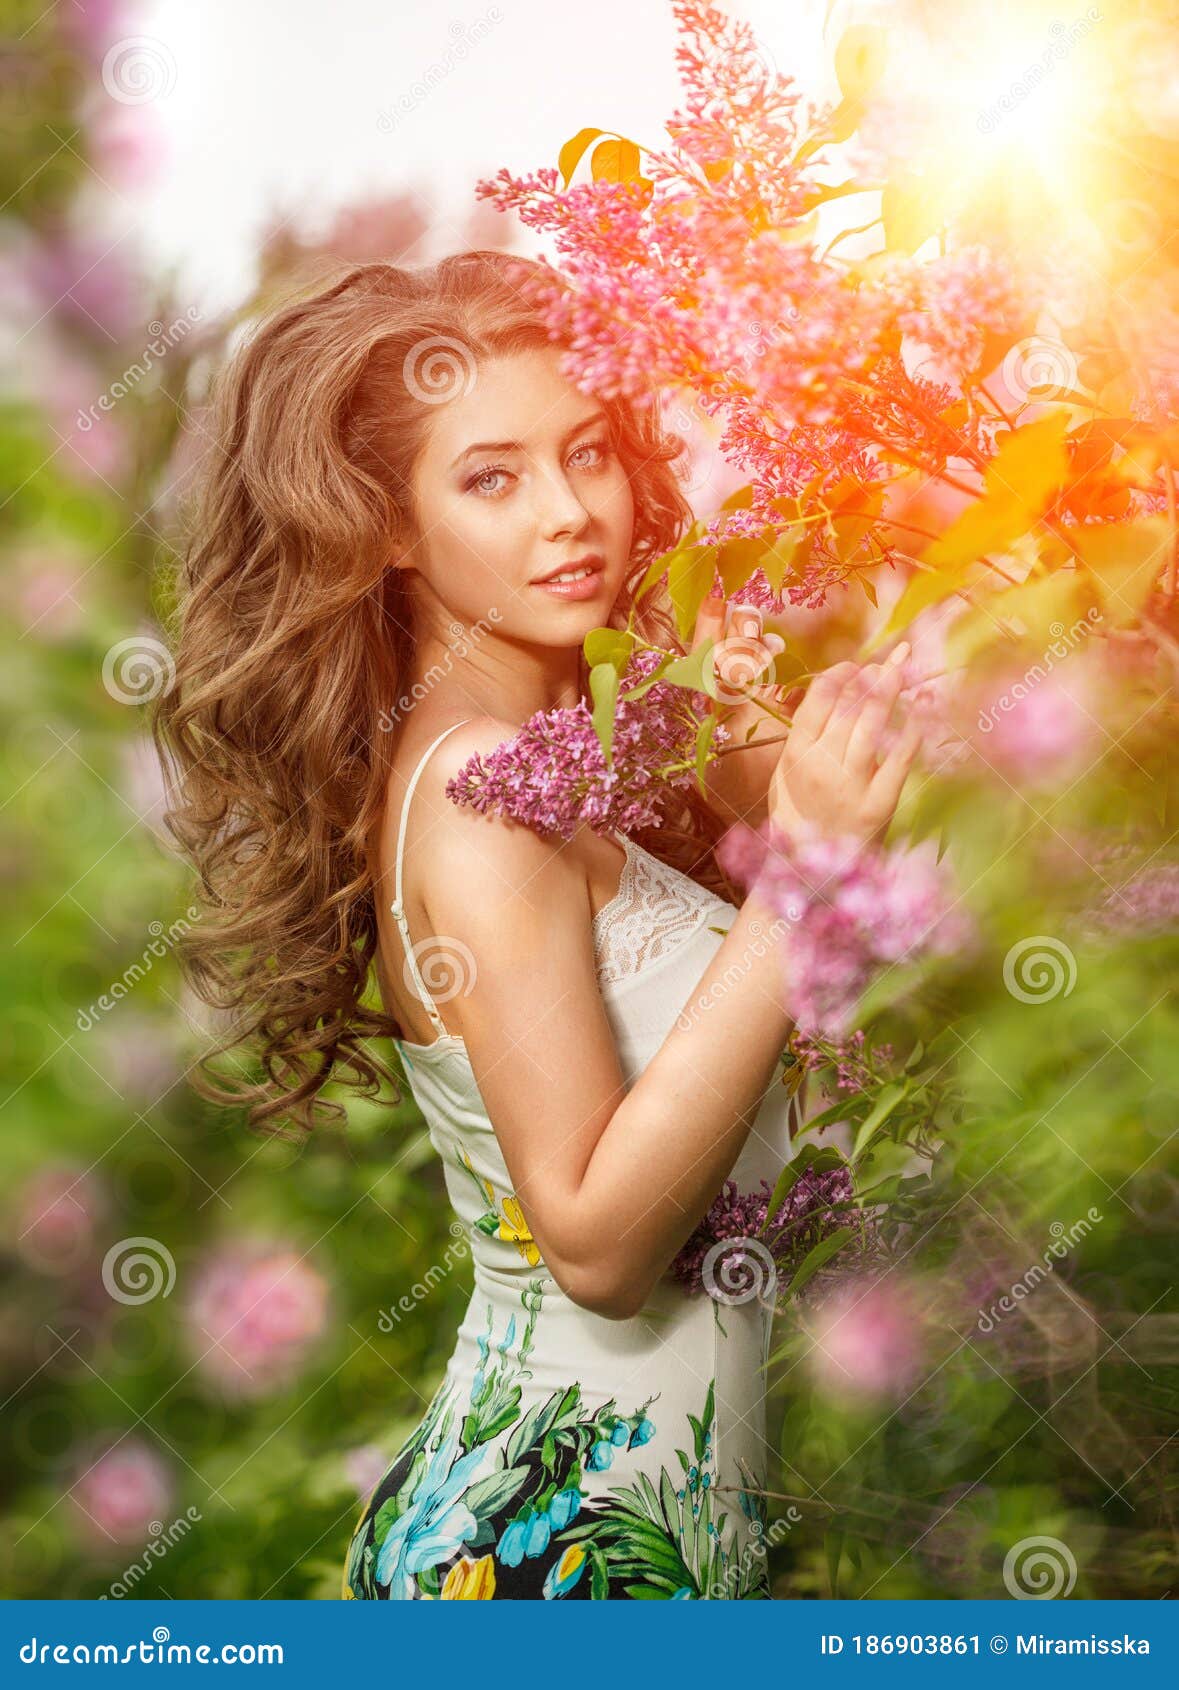 Beautiful Young Woman Near The Blossoming Spring Tree Model In Blossom Park Stock Image Image